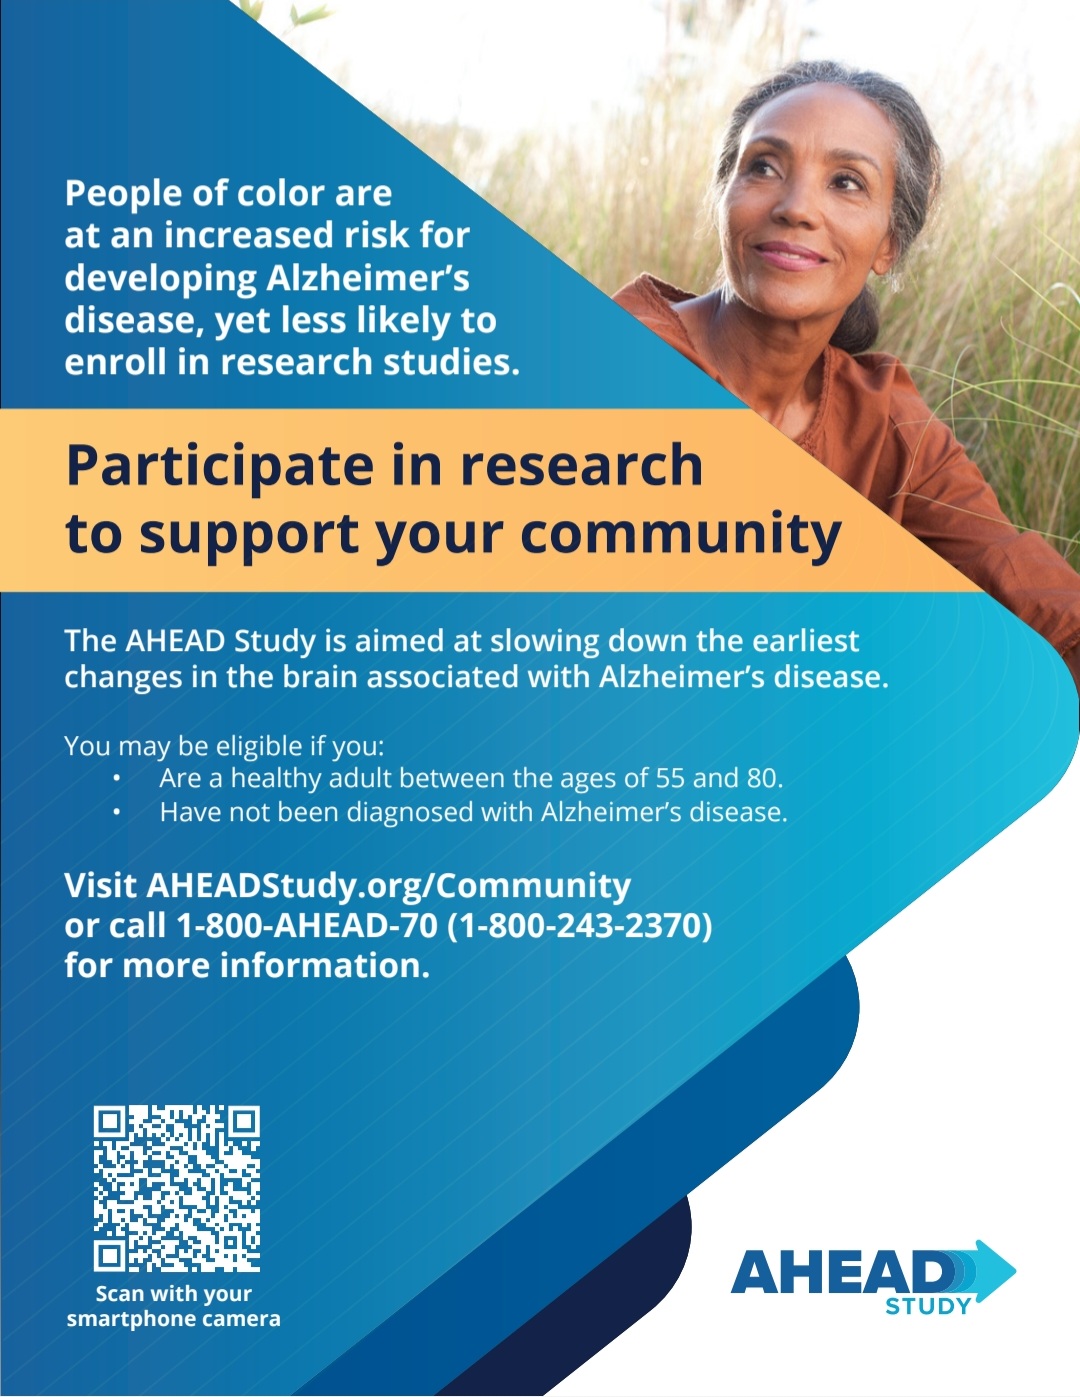 Study Participants Needed During Alzheimer’s Disease Awareness Month